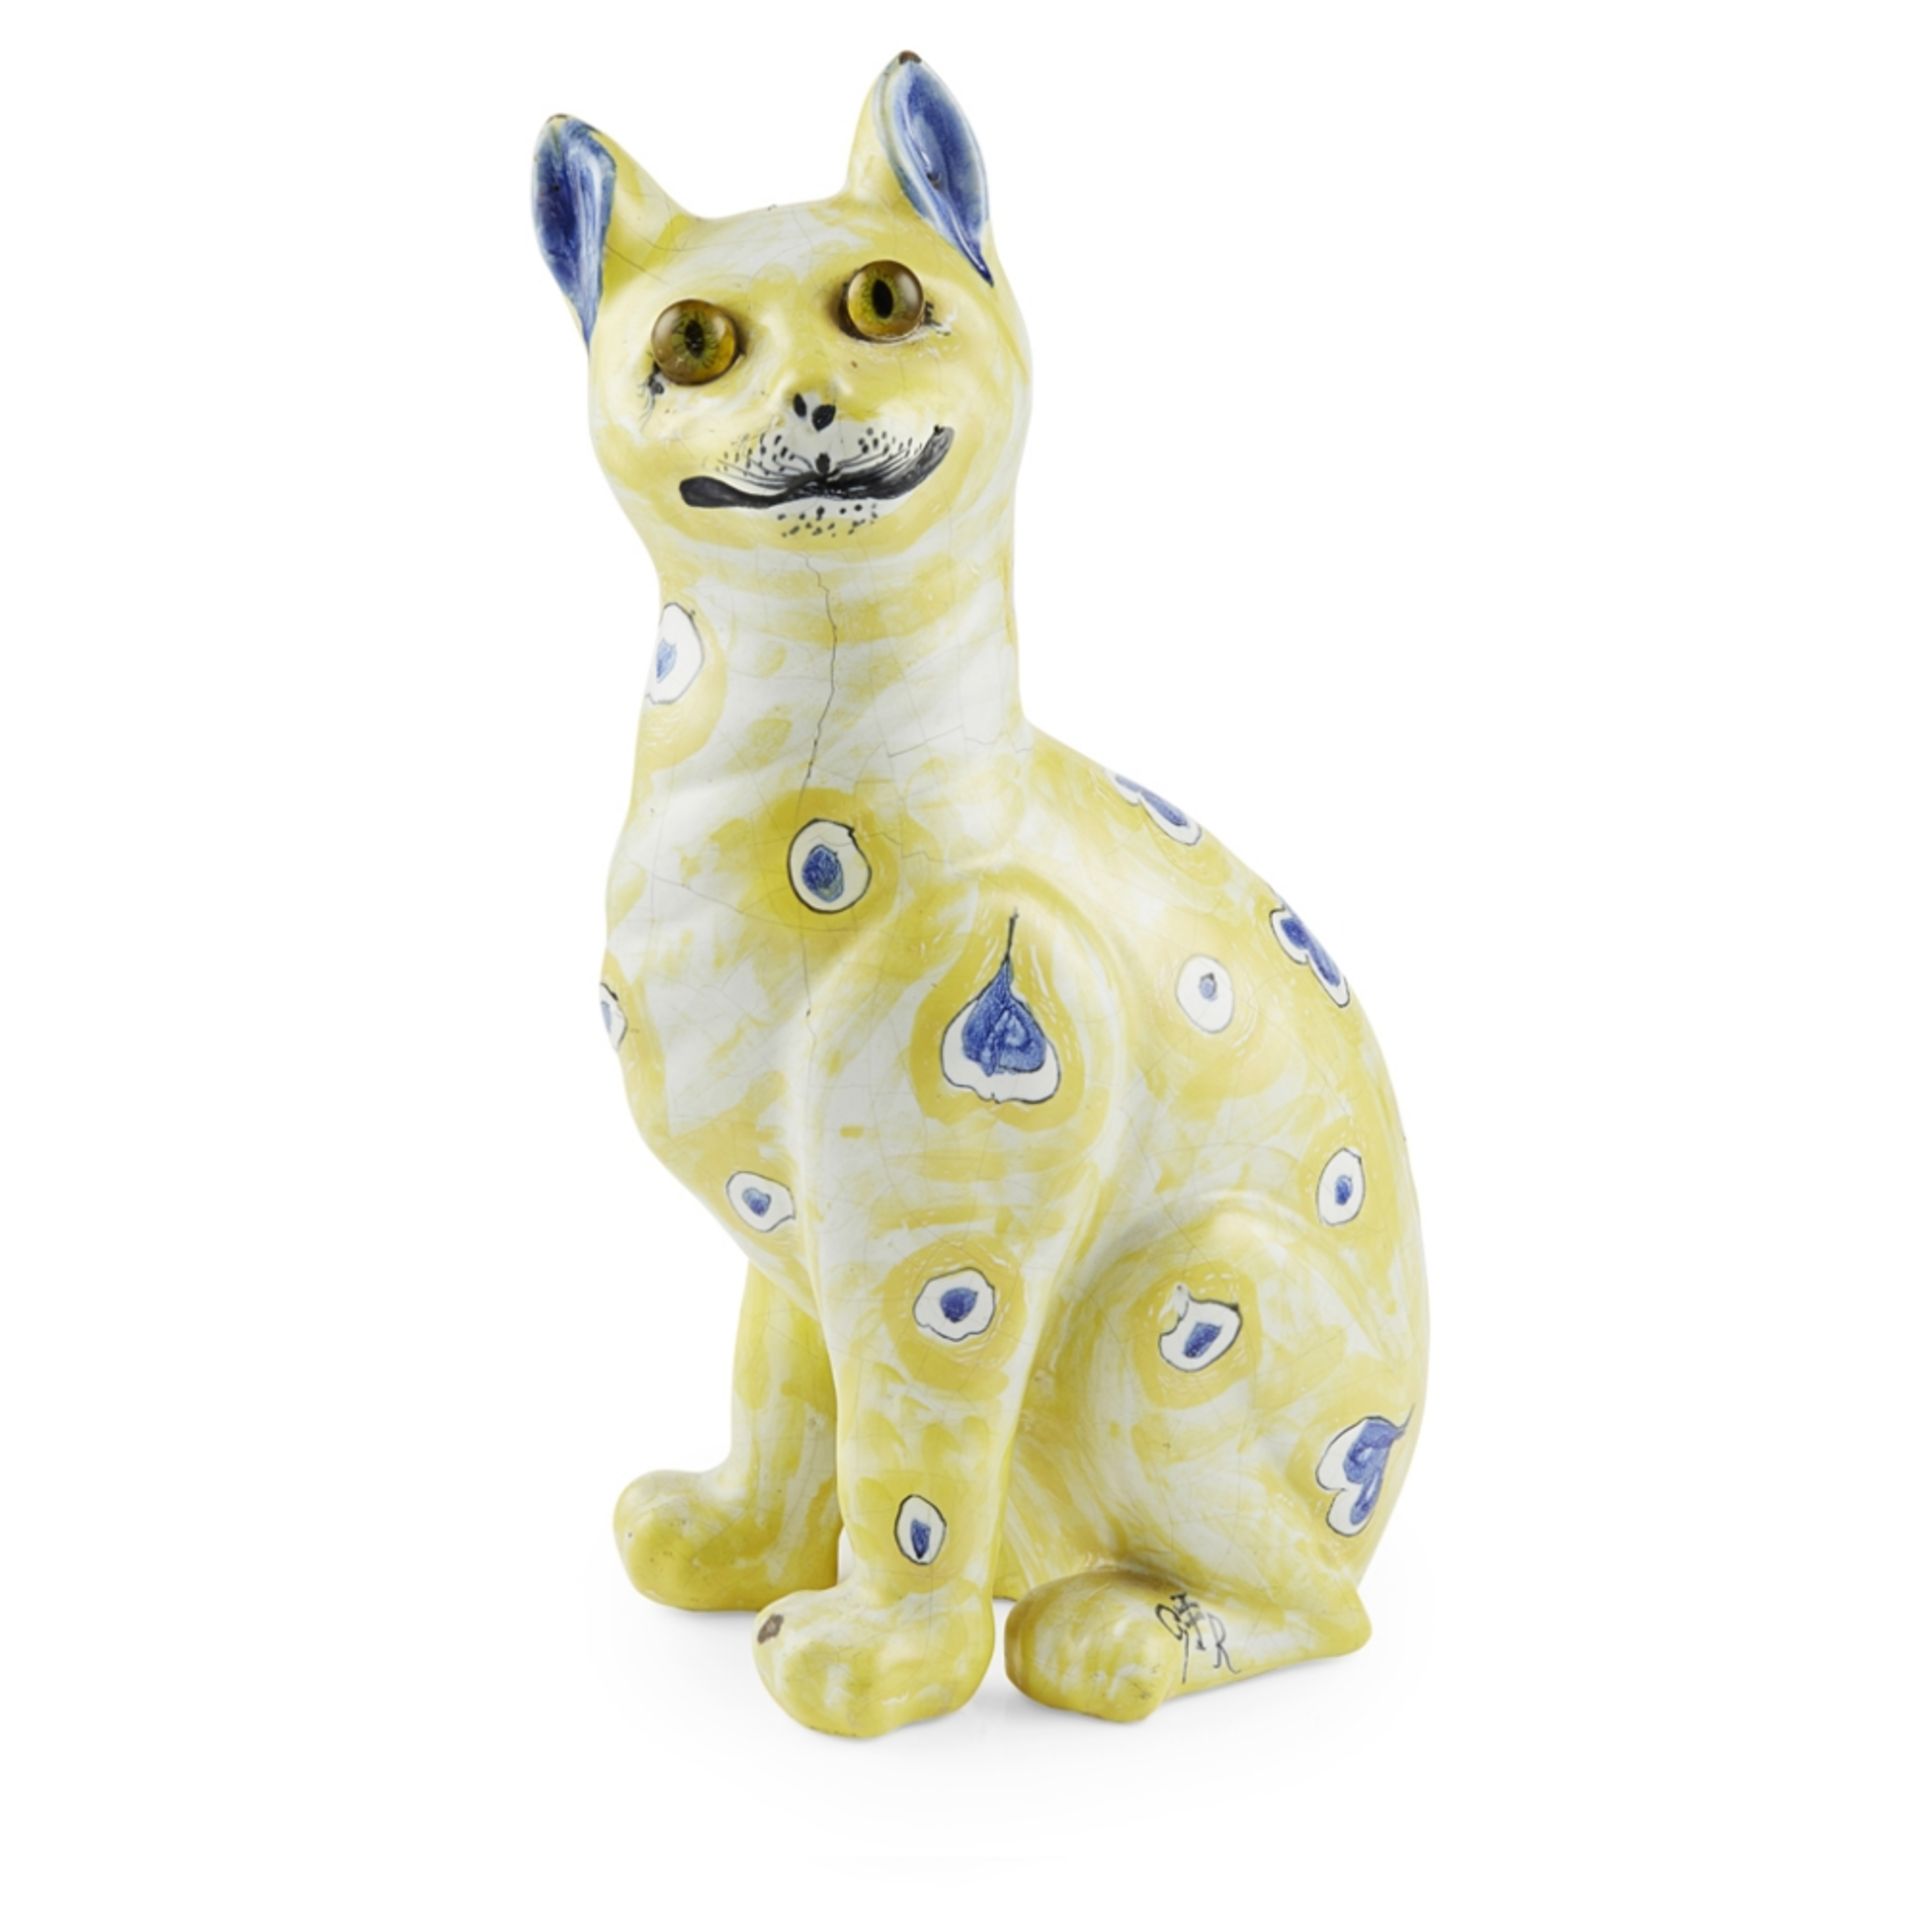 EMILE GALLE (1846-1904) ART NOUVEAU FAIENCE CAT FIGURE, CIRCA 1890 with applied glass eyes, - Image 2 of 2